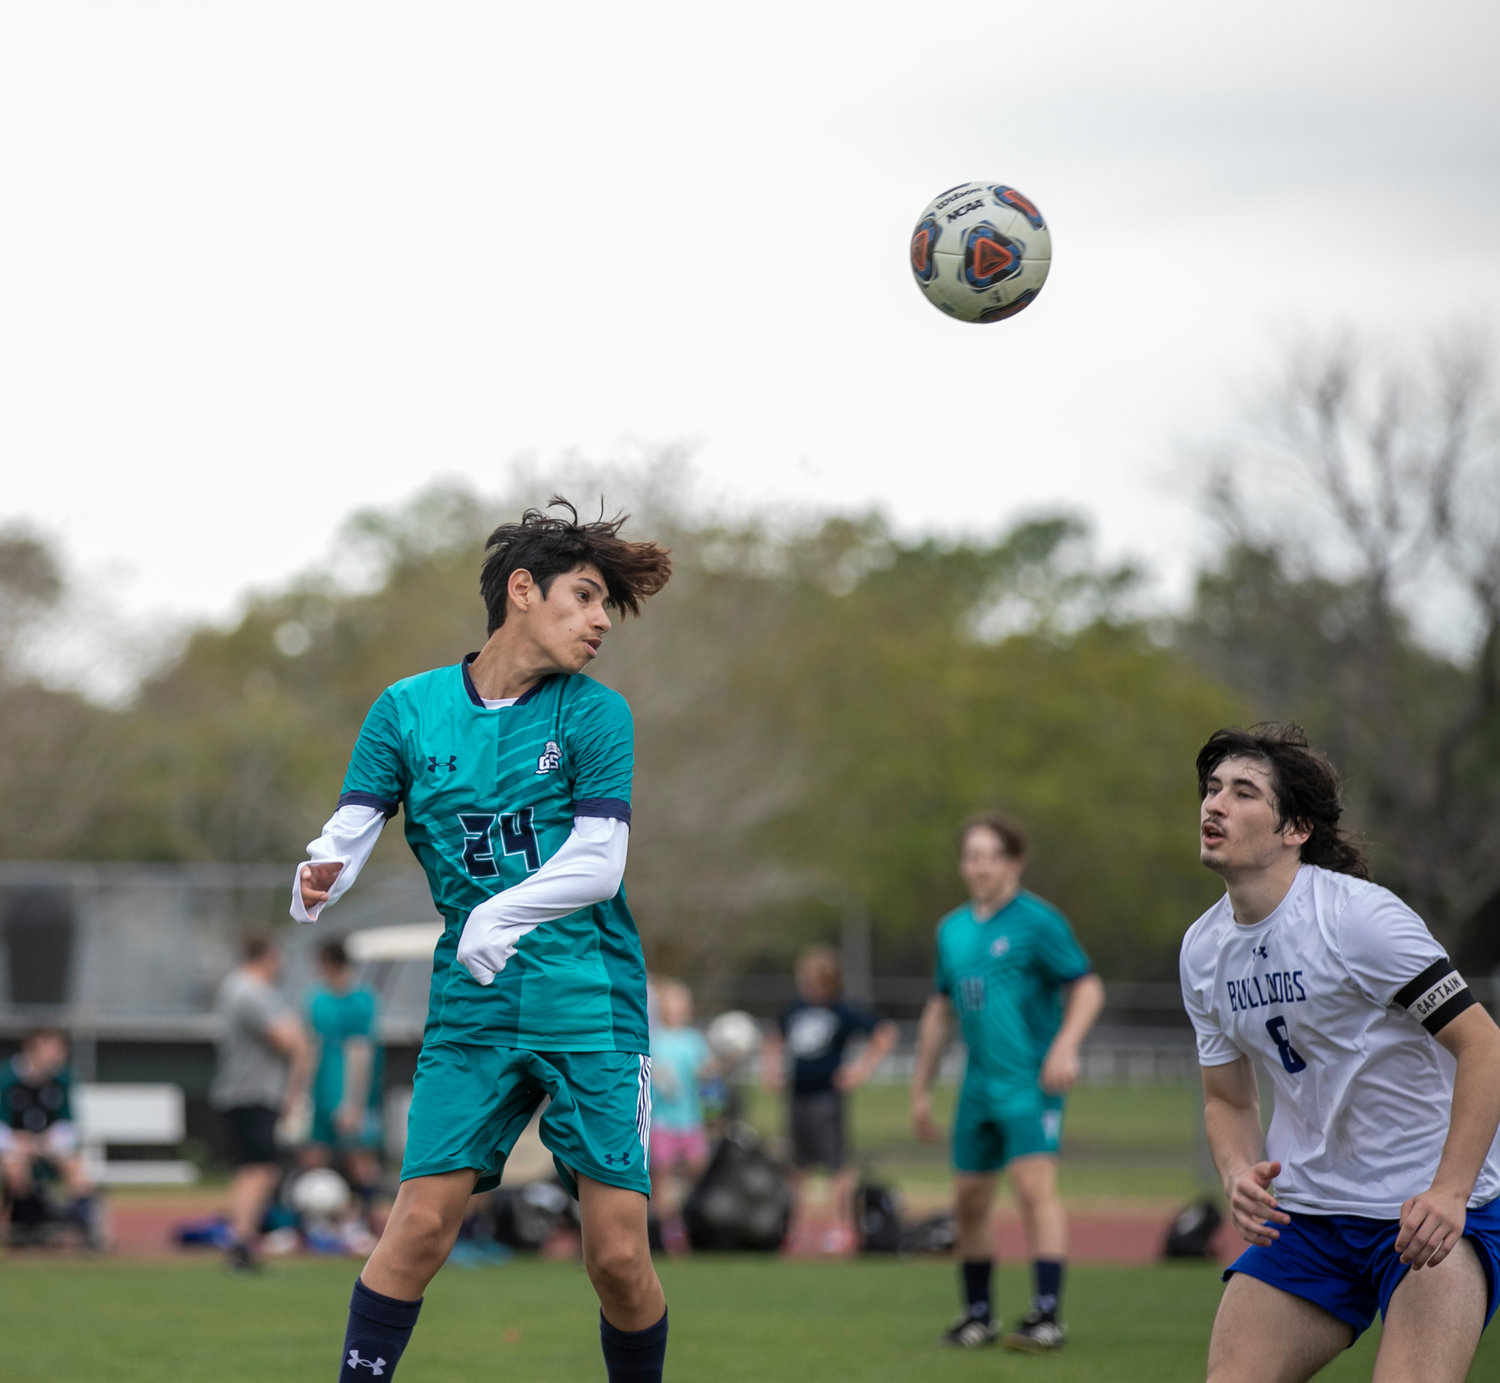 Gulf Shores junior Bryan Orellana makes a play on the ball during the Dolphins’ Island Cup match against the Marbury Bulldogs Saturday, March 11 at home. The fifth-ranked Gulf Shores squad was the highest-ranked boys’ team in the county following March 19’s updated poll.